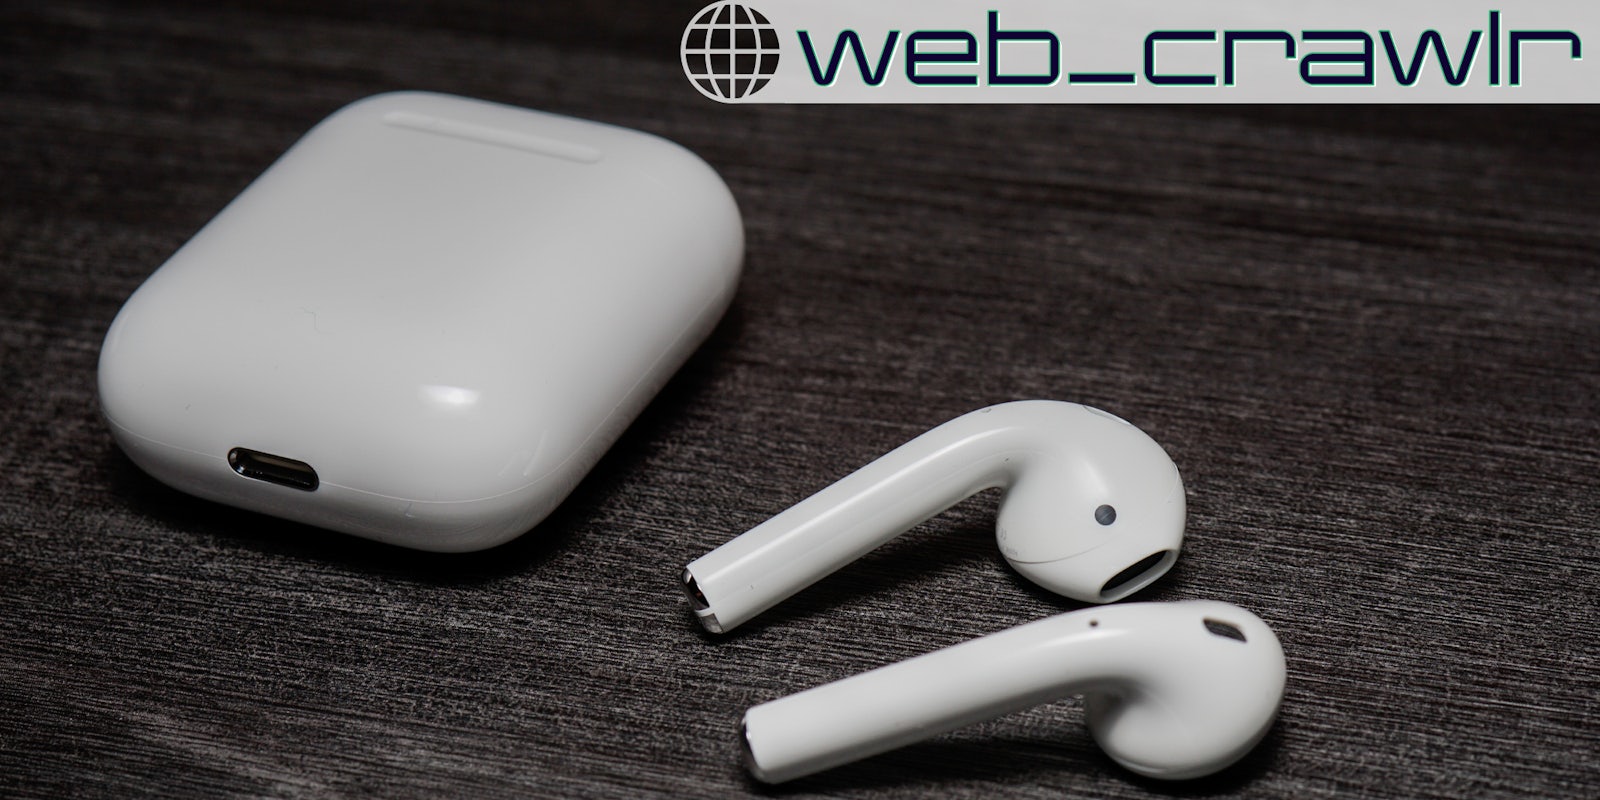 Apple AirPods on a table. The Daily Dot newsletter web_crawlr logo is in the top right corner.